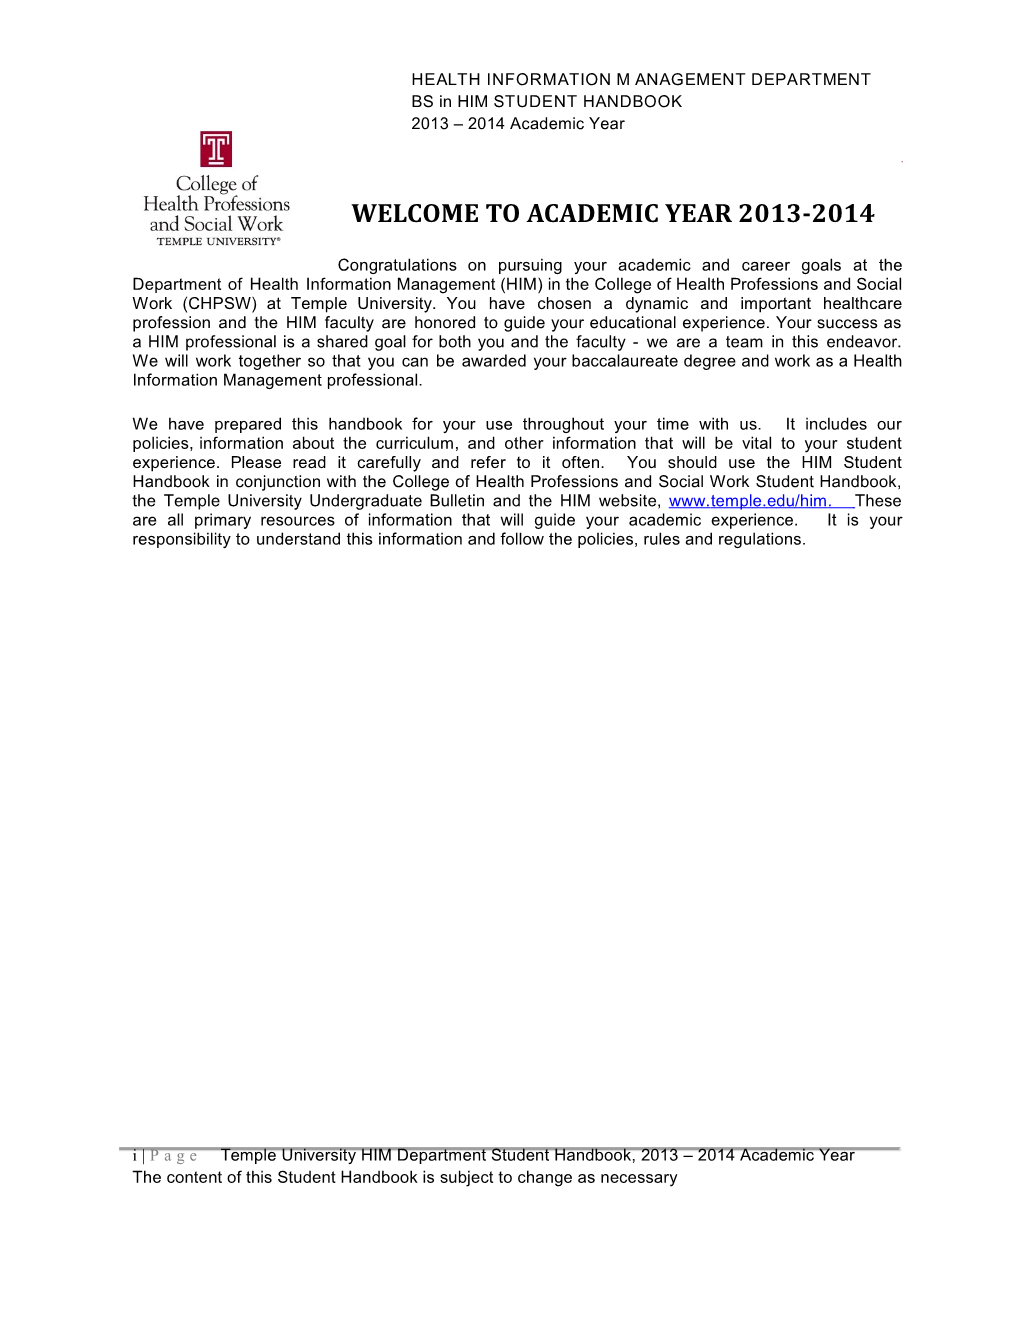 Welcome to Academic Year 2013-2014